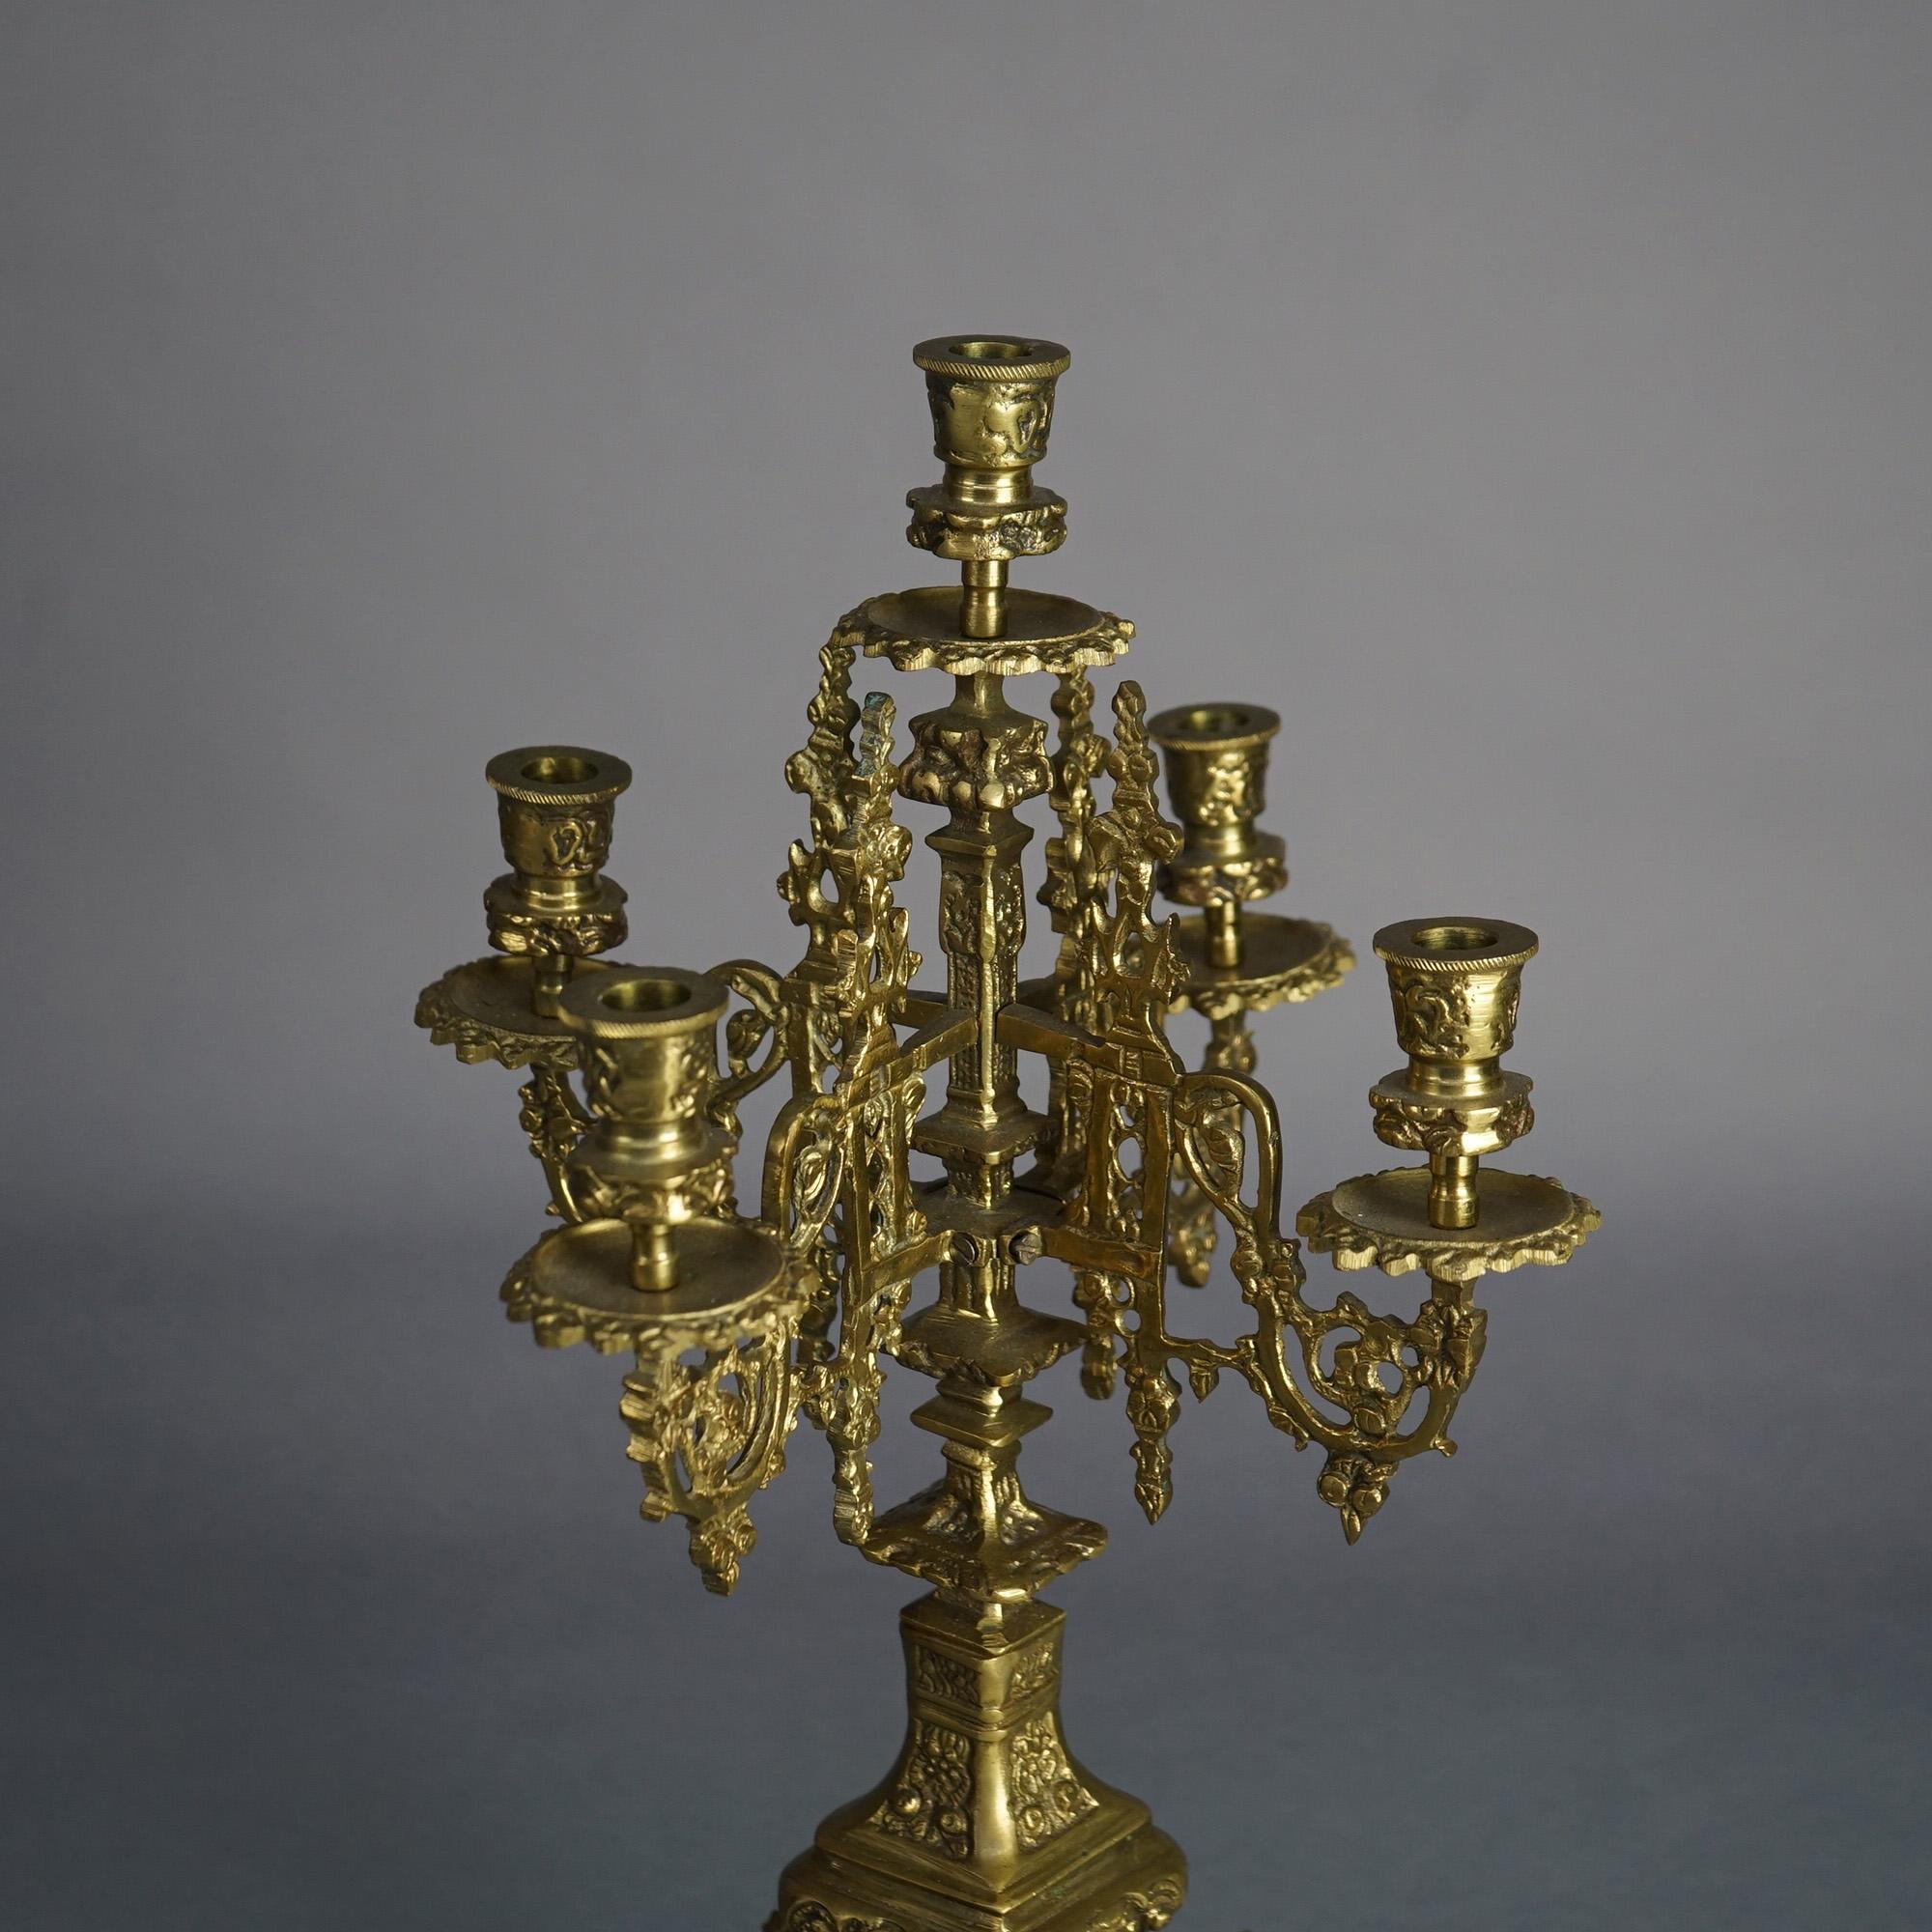 Antique Pair Gothic Revival Bronzed Five-Light & Footed Candelabra C1850 For Sale 1